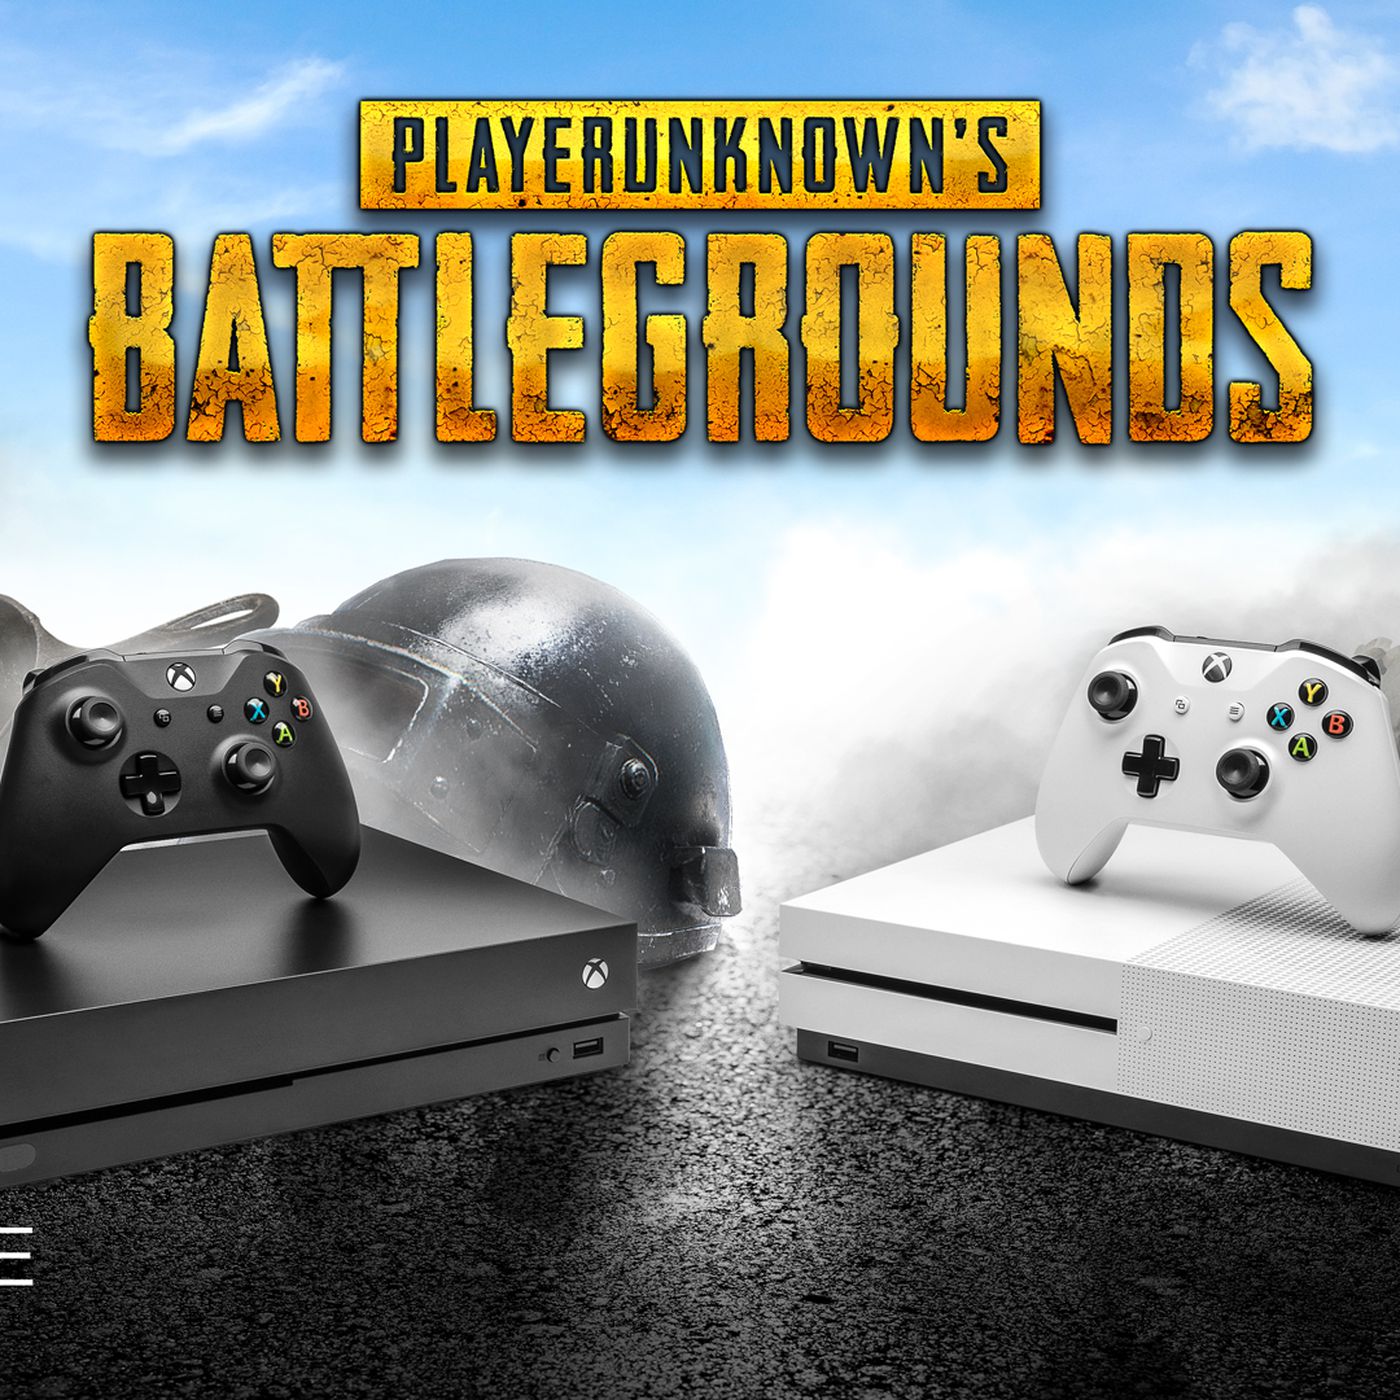 When is Pubg Coming to Xbox One Uk?